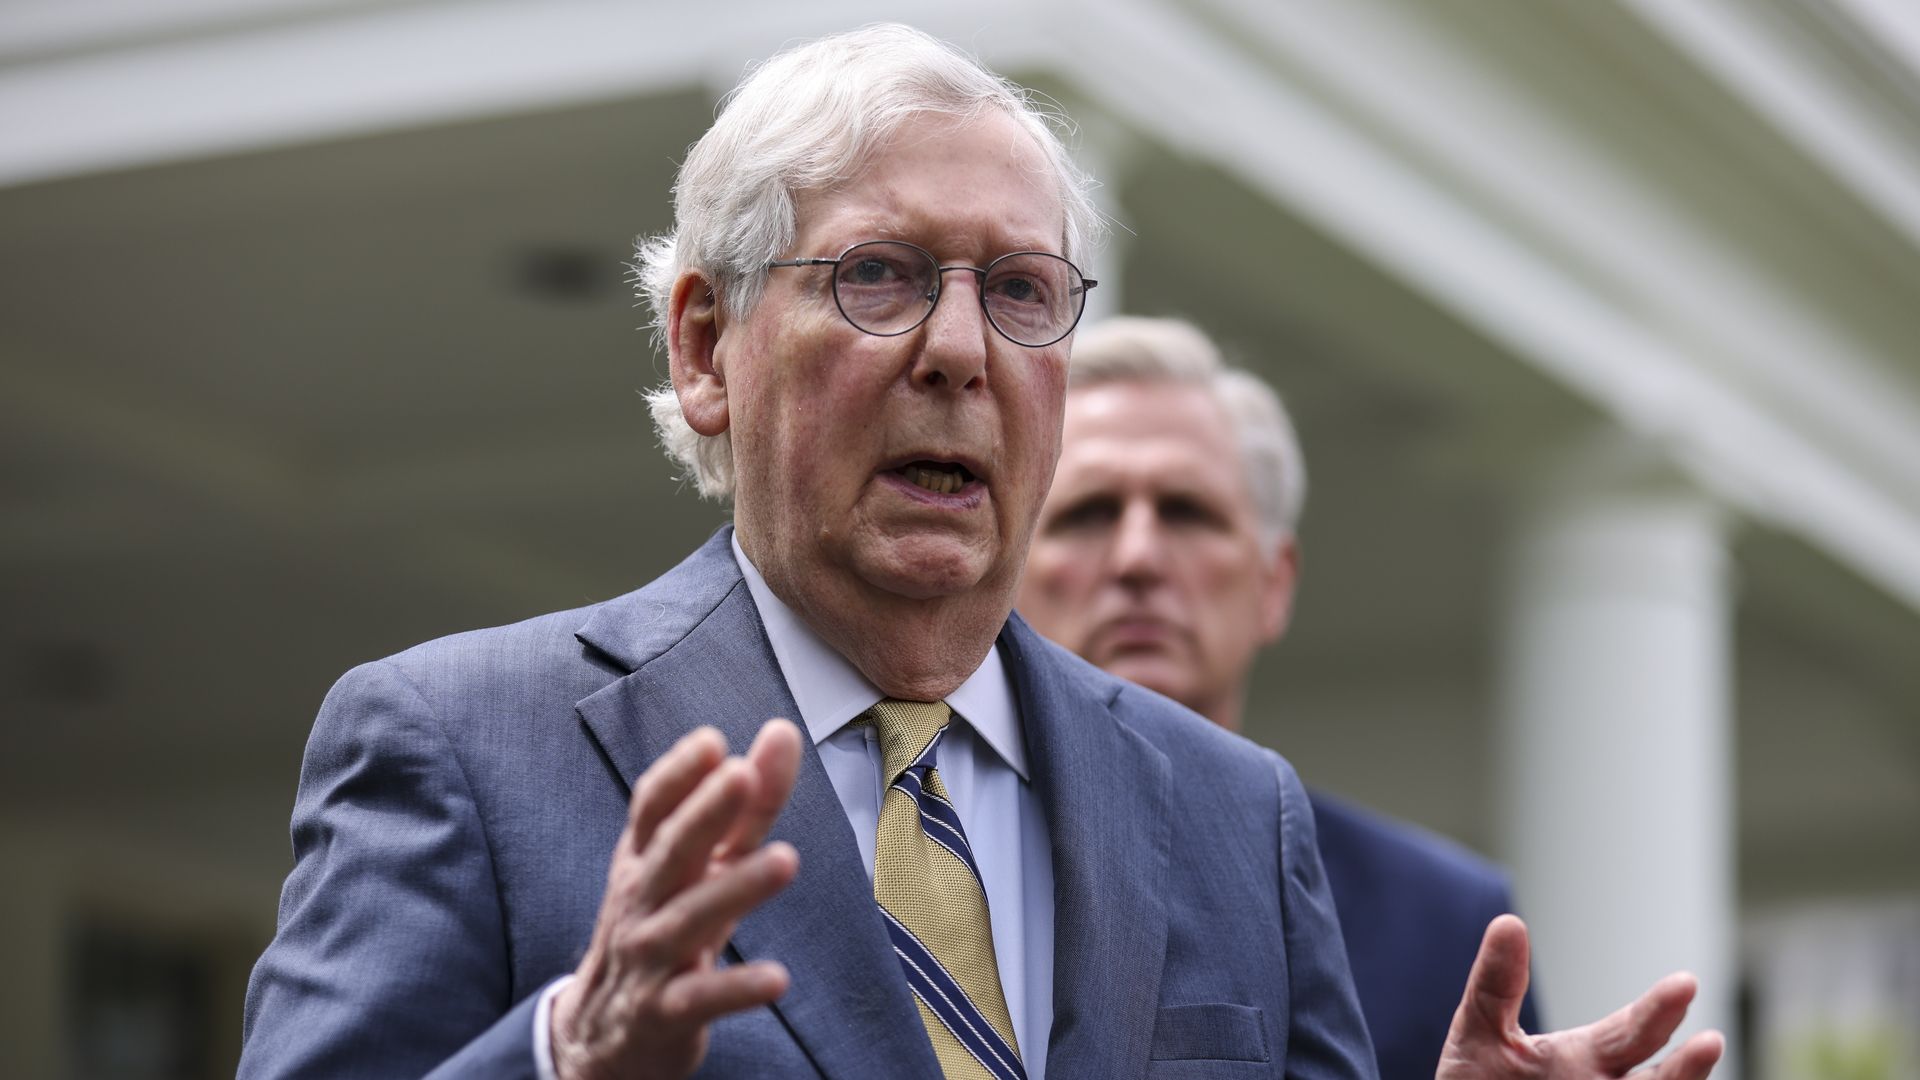 Senate Minority Leader Mitch McConnell, a Republican from Kentucky, speaks to members of the media as U.S. House Minority Leader Kevin McCarthy, a Republican from California, right, listens.